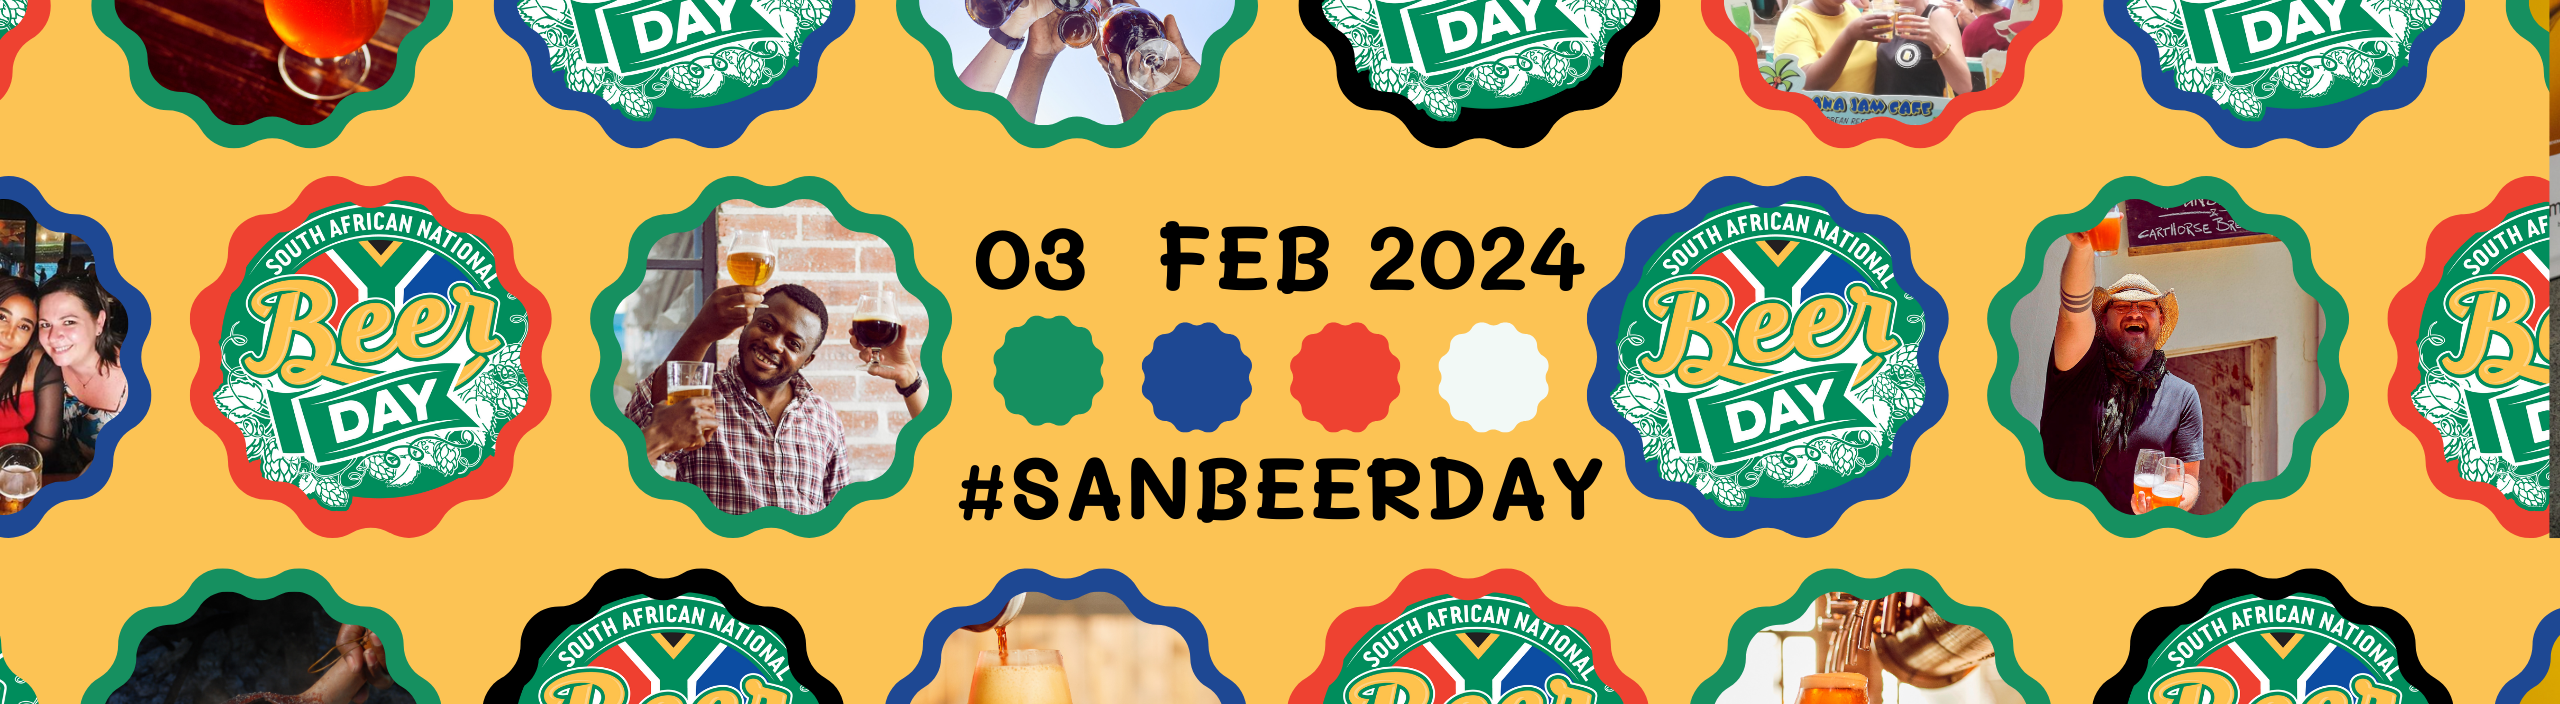 South African National Beer Day